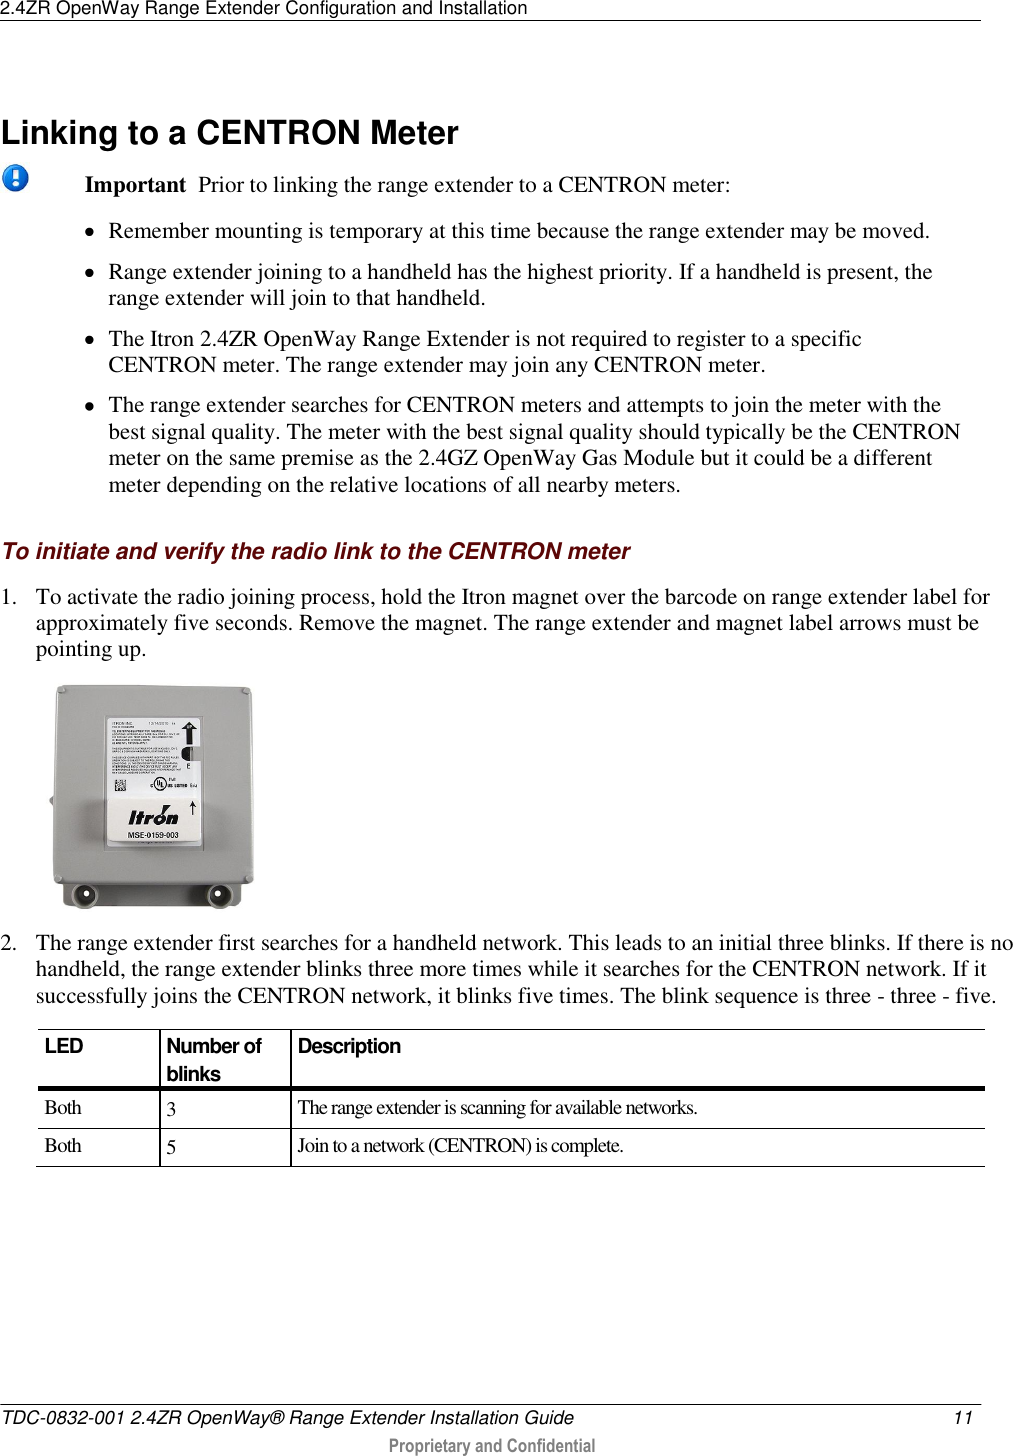 2.4ZR OpenWay Range Extender Configuration and Installation   TDC-0832-001 2.4ZR OpenWay® Range Extender Installation Guide  11   Proprietary and Confidential        Linking to a CENTRON Meter   Important  Prior to linking the range extender to a CENTRON meter:  Remember mounting is temporary at this time because the range extender may be moved.  Range extender joining to a handheld has the highest priority. If a handheld is present, the range extender will join to that handheld.  The Itron 2.4ZR OpenWay Range Extender is not required to register to a specific CENTRON meter. The range extender may join any CENTRON meter.  The range extender searches for CENTRON meters and attempts to join the meter with the best signal quality. The meter with the best signal quality should typically be the CENTRON meter on the same premise as the 2.4GZ OpenWay Gas Module but it could be a different meter depending on the relative locations of all nearby meters.   To initiate and verify the radio link to the CENTRON meter 1. To activate the radio joining process, hold the Itron magnet over the barcode on range extender label for approximately five seconds. Remove the magnet. The range extender and magnet label arrows must be pointing up.  2. The range extender first searches for a handheld network. This leads to an initial three blinks. If there is no handheld, the range extender blinks three more times while it searches for the CENTRON network. If it successfully joins the CENTRON network, it blinks five times. The blink sequence is three - three - five.   LED  Number of blinks Description Both 3 The range extender is scanning for available networks. Both 5 Join to a network (CENTRON) is complete. 